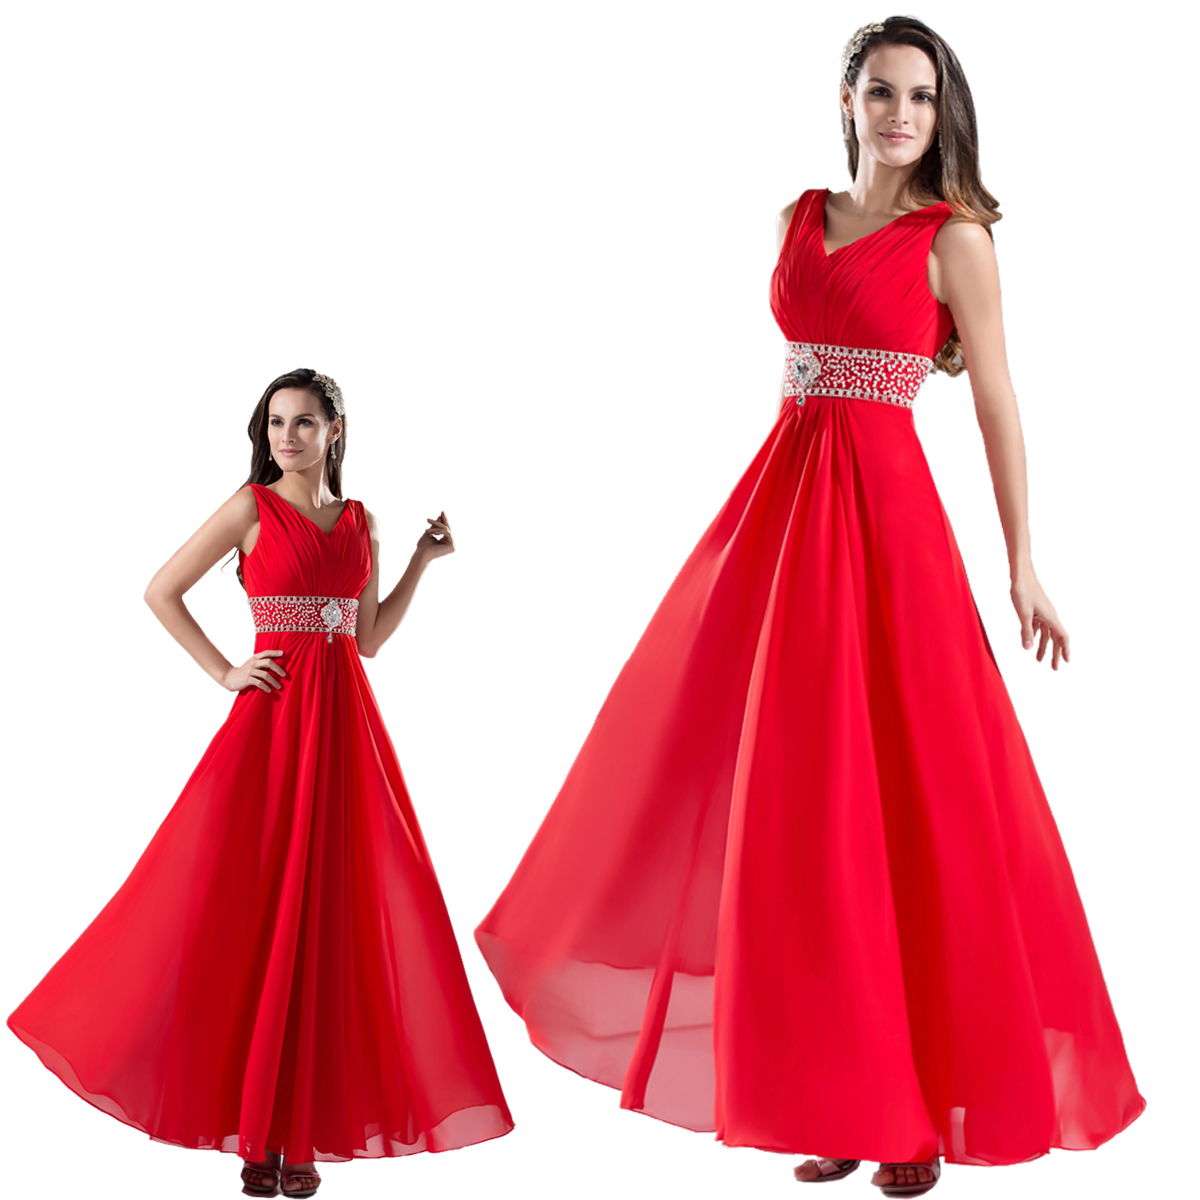 Elegant Sleeveless Double-shoulder Straps Red Chiffon Banquet Party Prom Evening Dress Fashion Women Costume